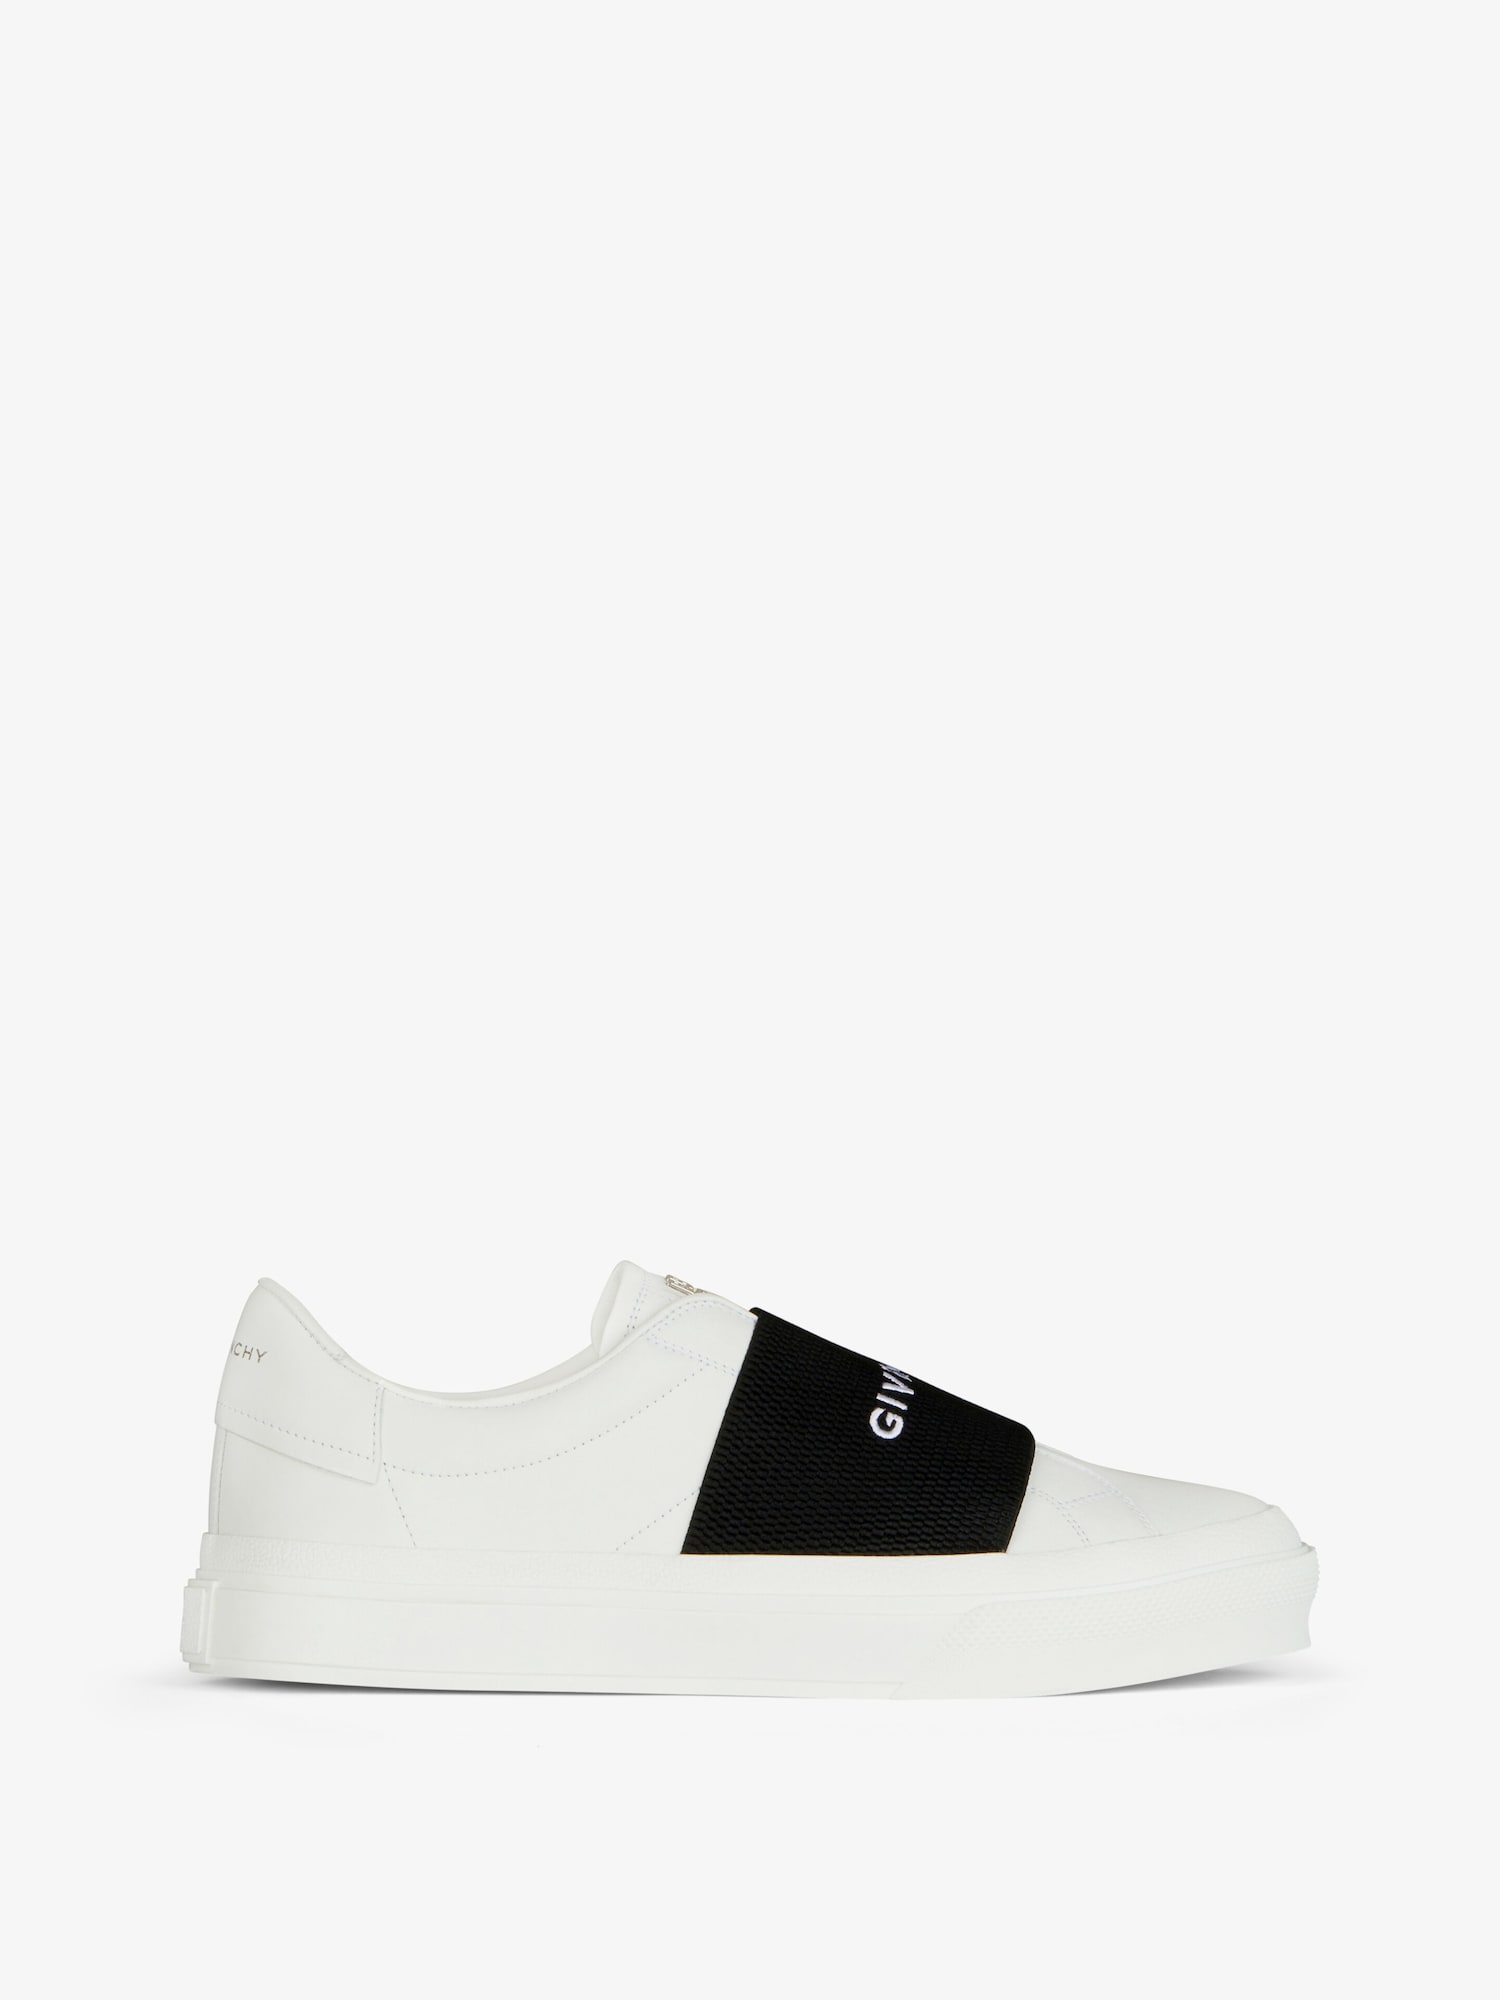 givenchy.com | Sneakers in leather with GIVENCHY webbing